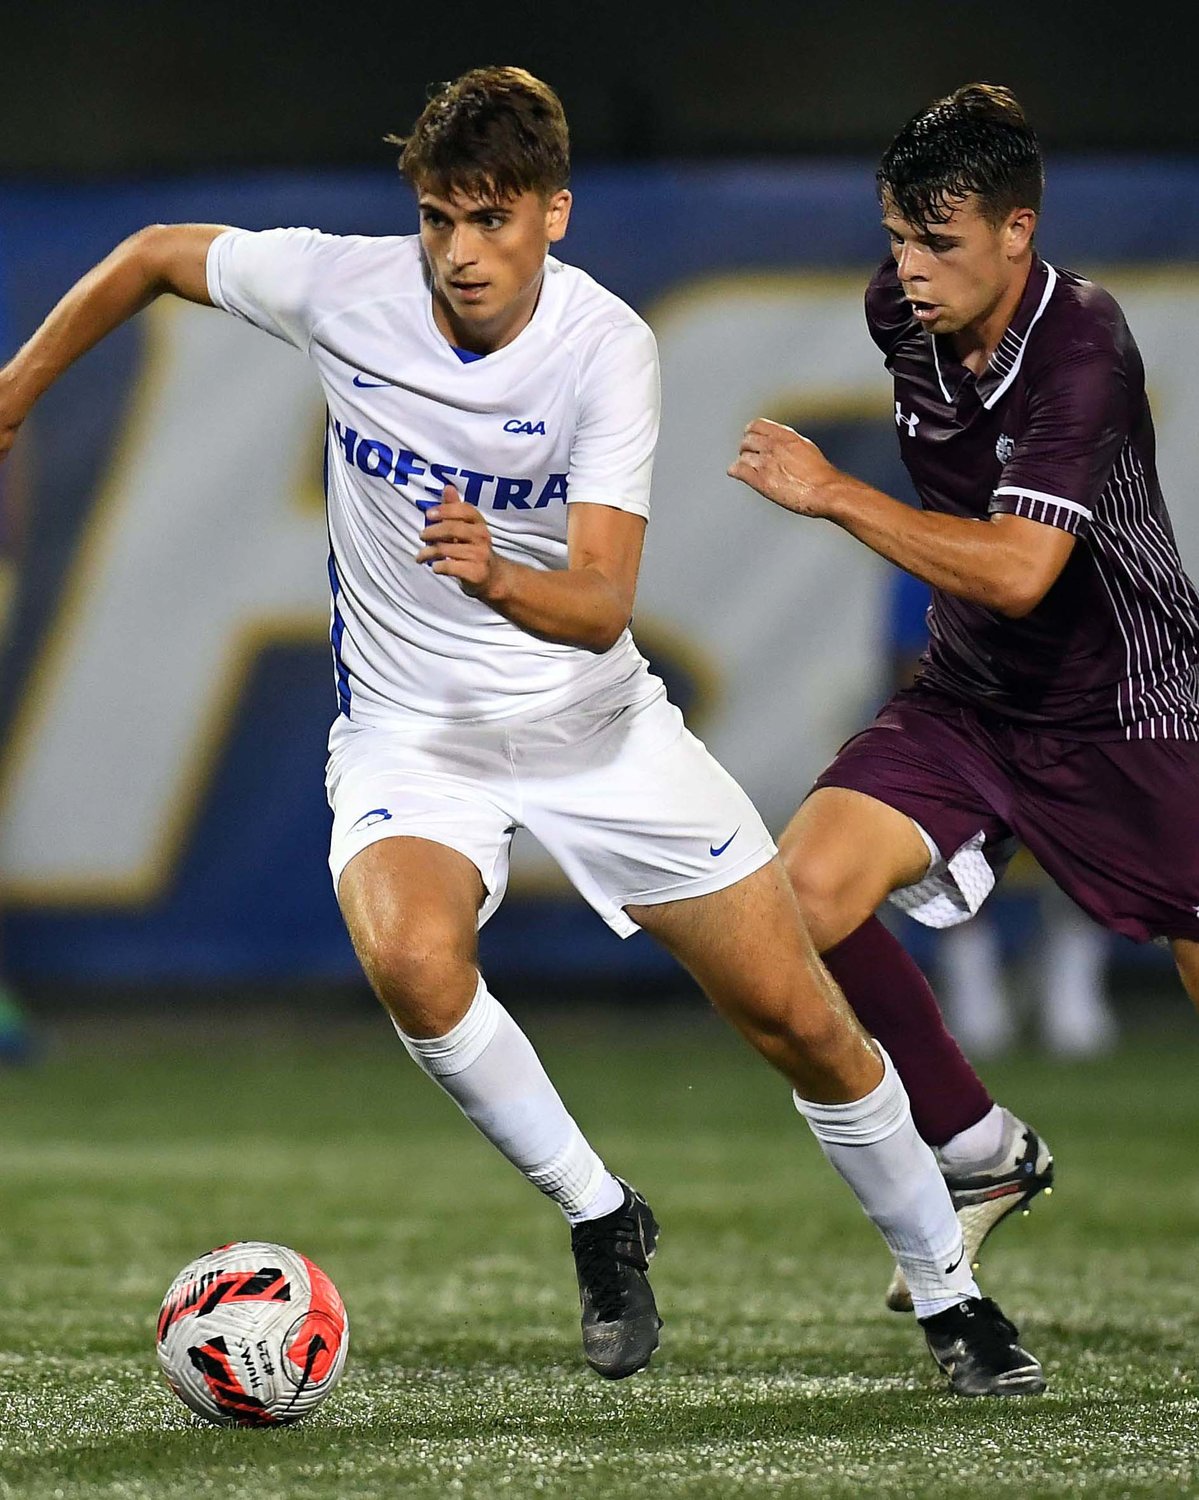 All-American midfielder Hendrik Hebbeker, left, was a big part of a prolific Hofstra offense in 2021 with 9 goals and 11 assists.